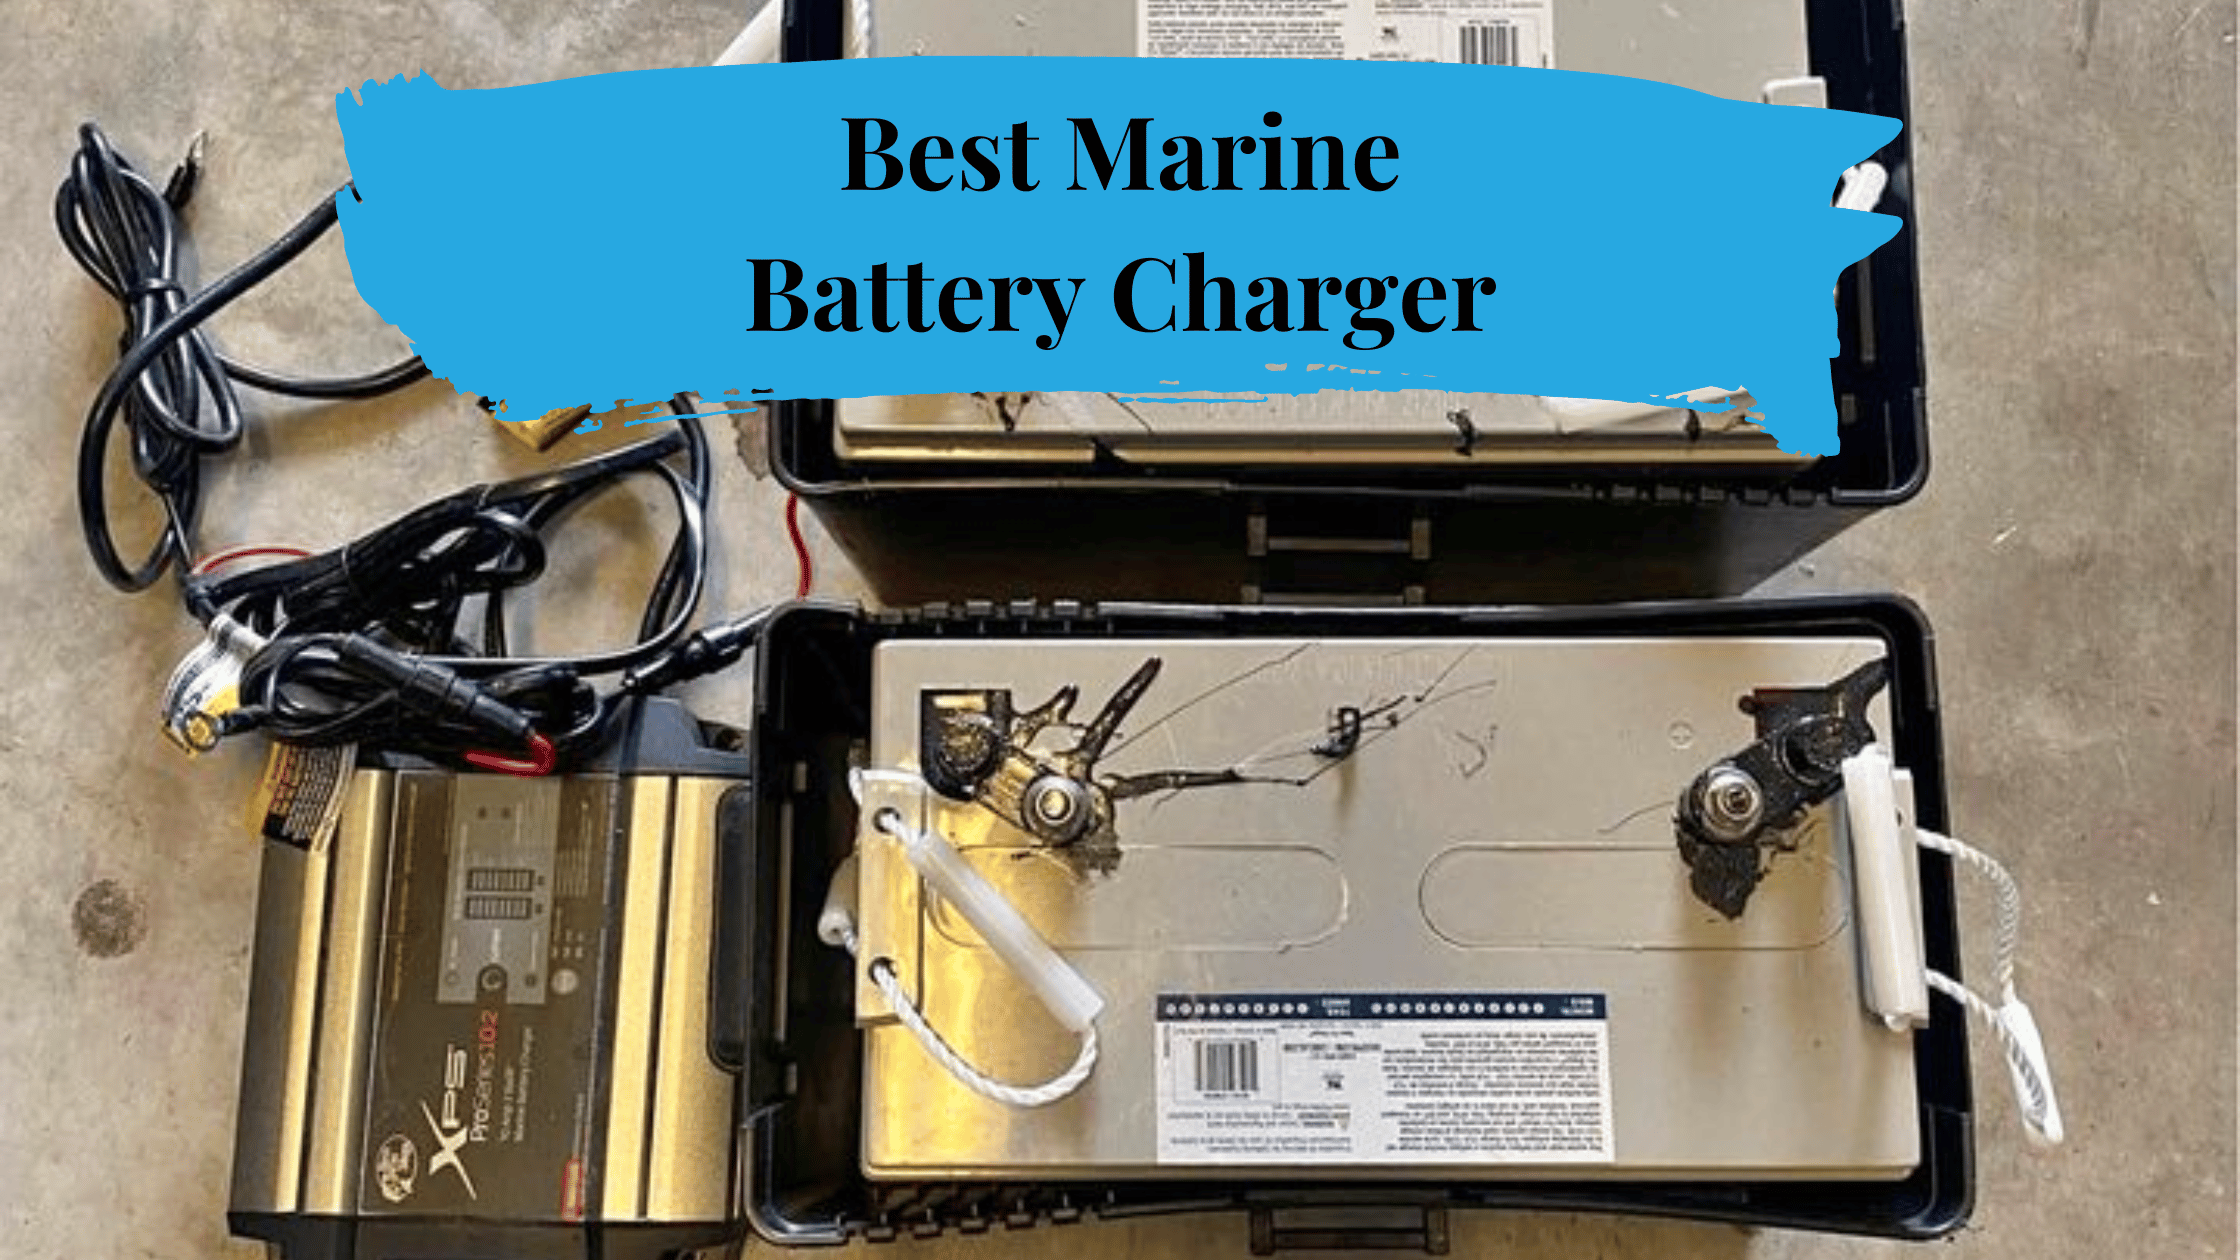 Best Marine Battery Charger